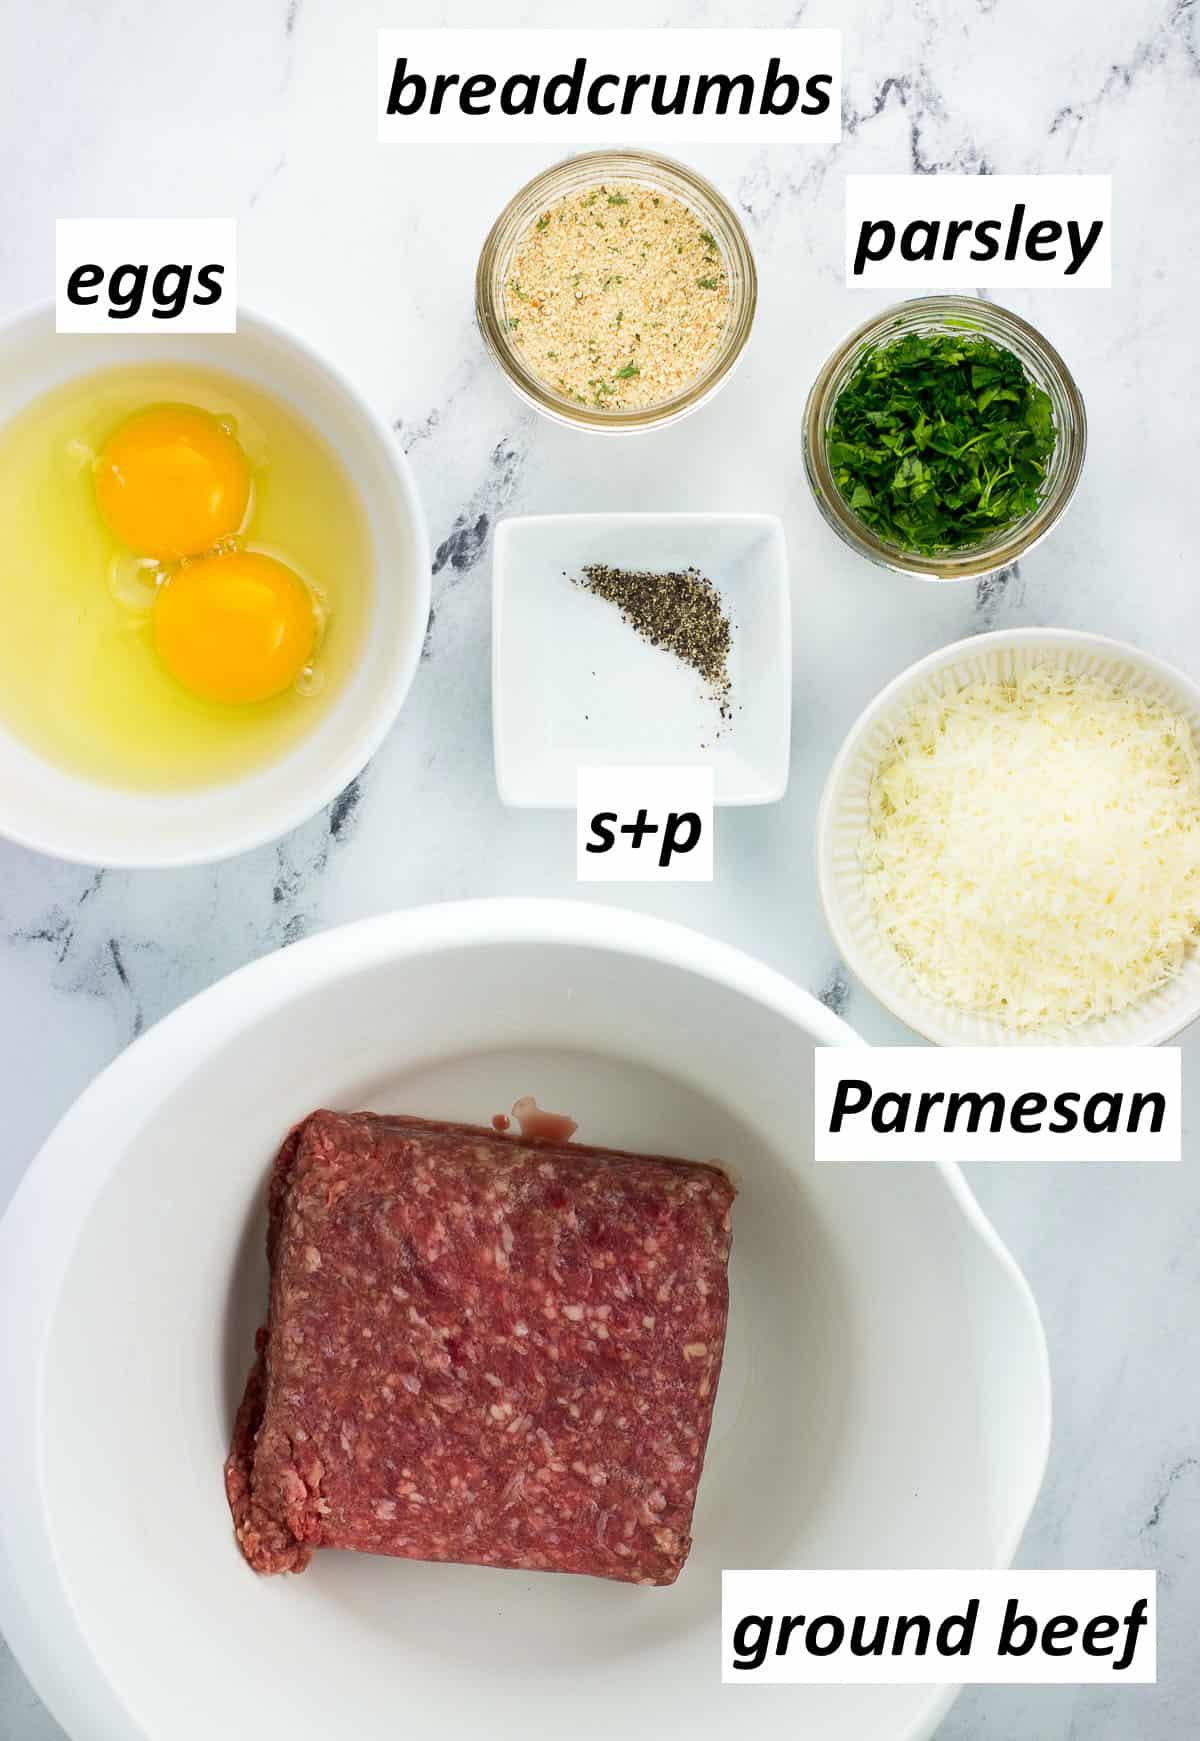 Meatball ingredients in separate bowls before being combined.